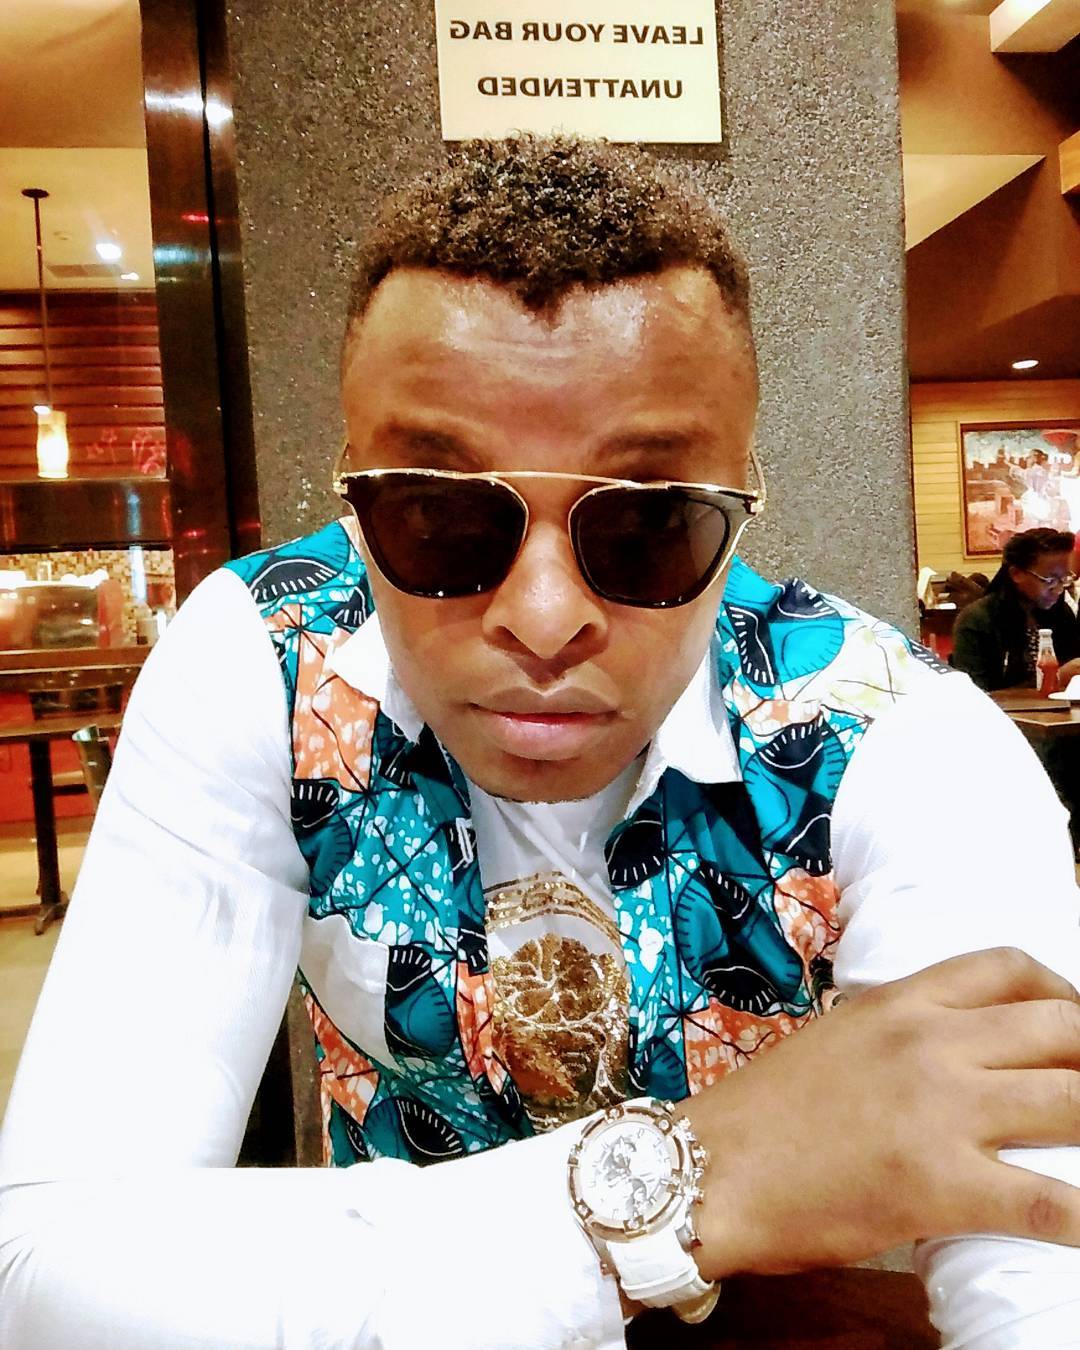 Lanes! Controversial gospel artist Ringtone planning to buy himself an aeroplane, where does he get his money from?